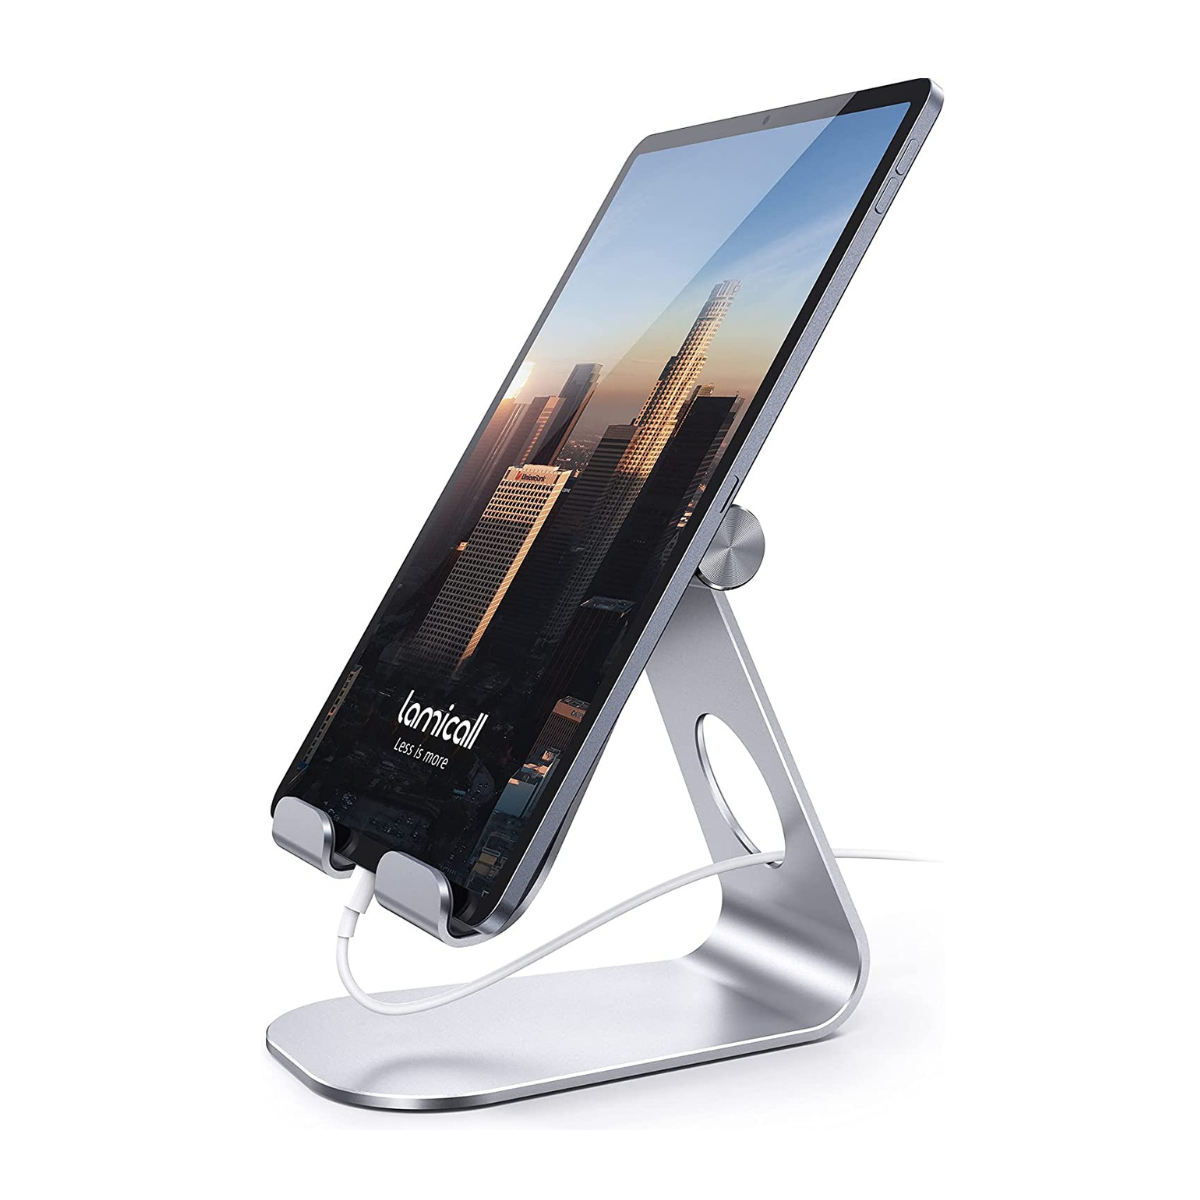 The Lamicall Adjustable Tablet Stand.